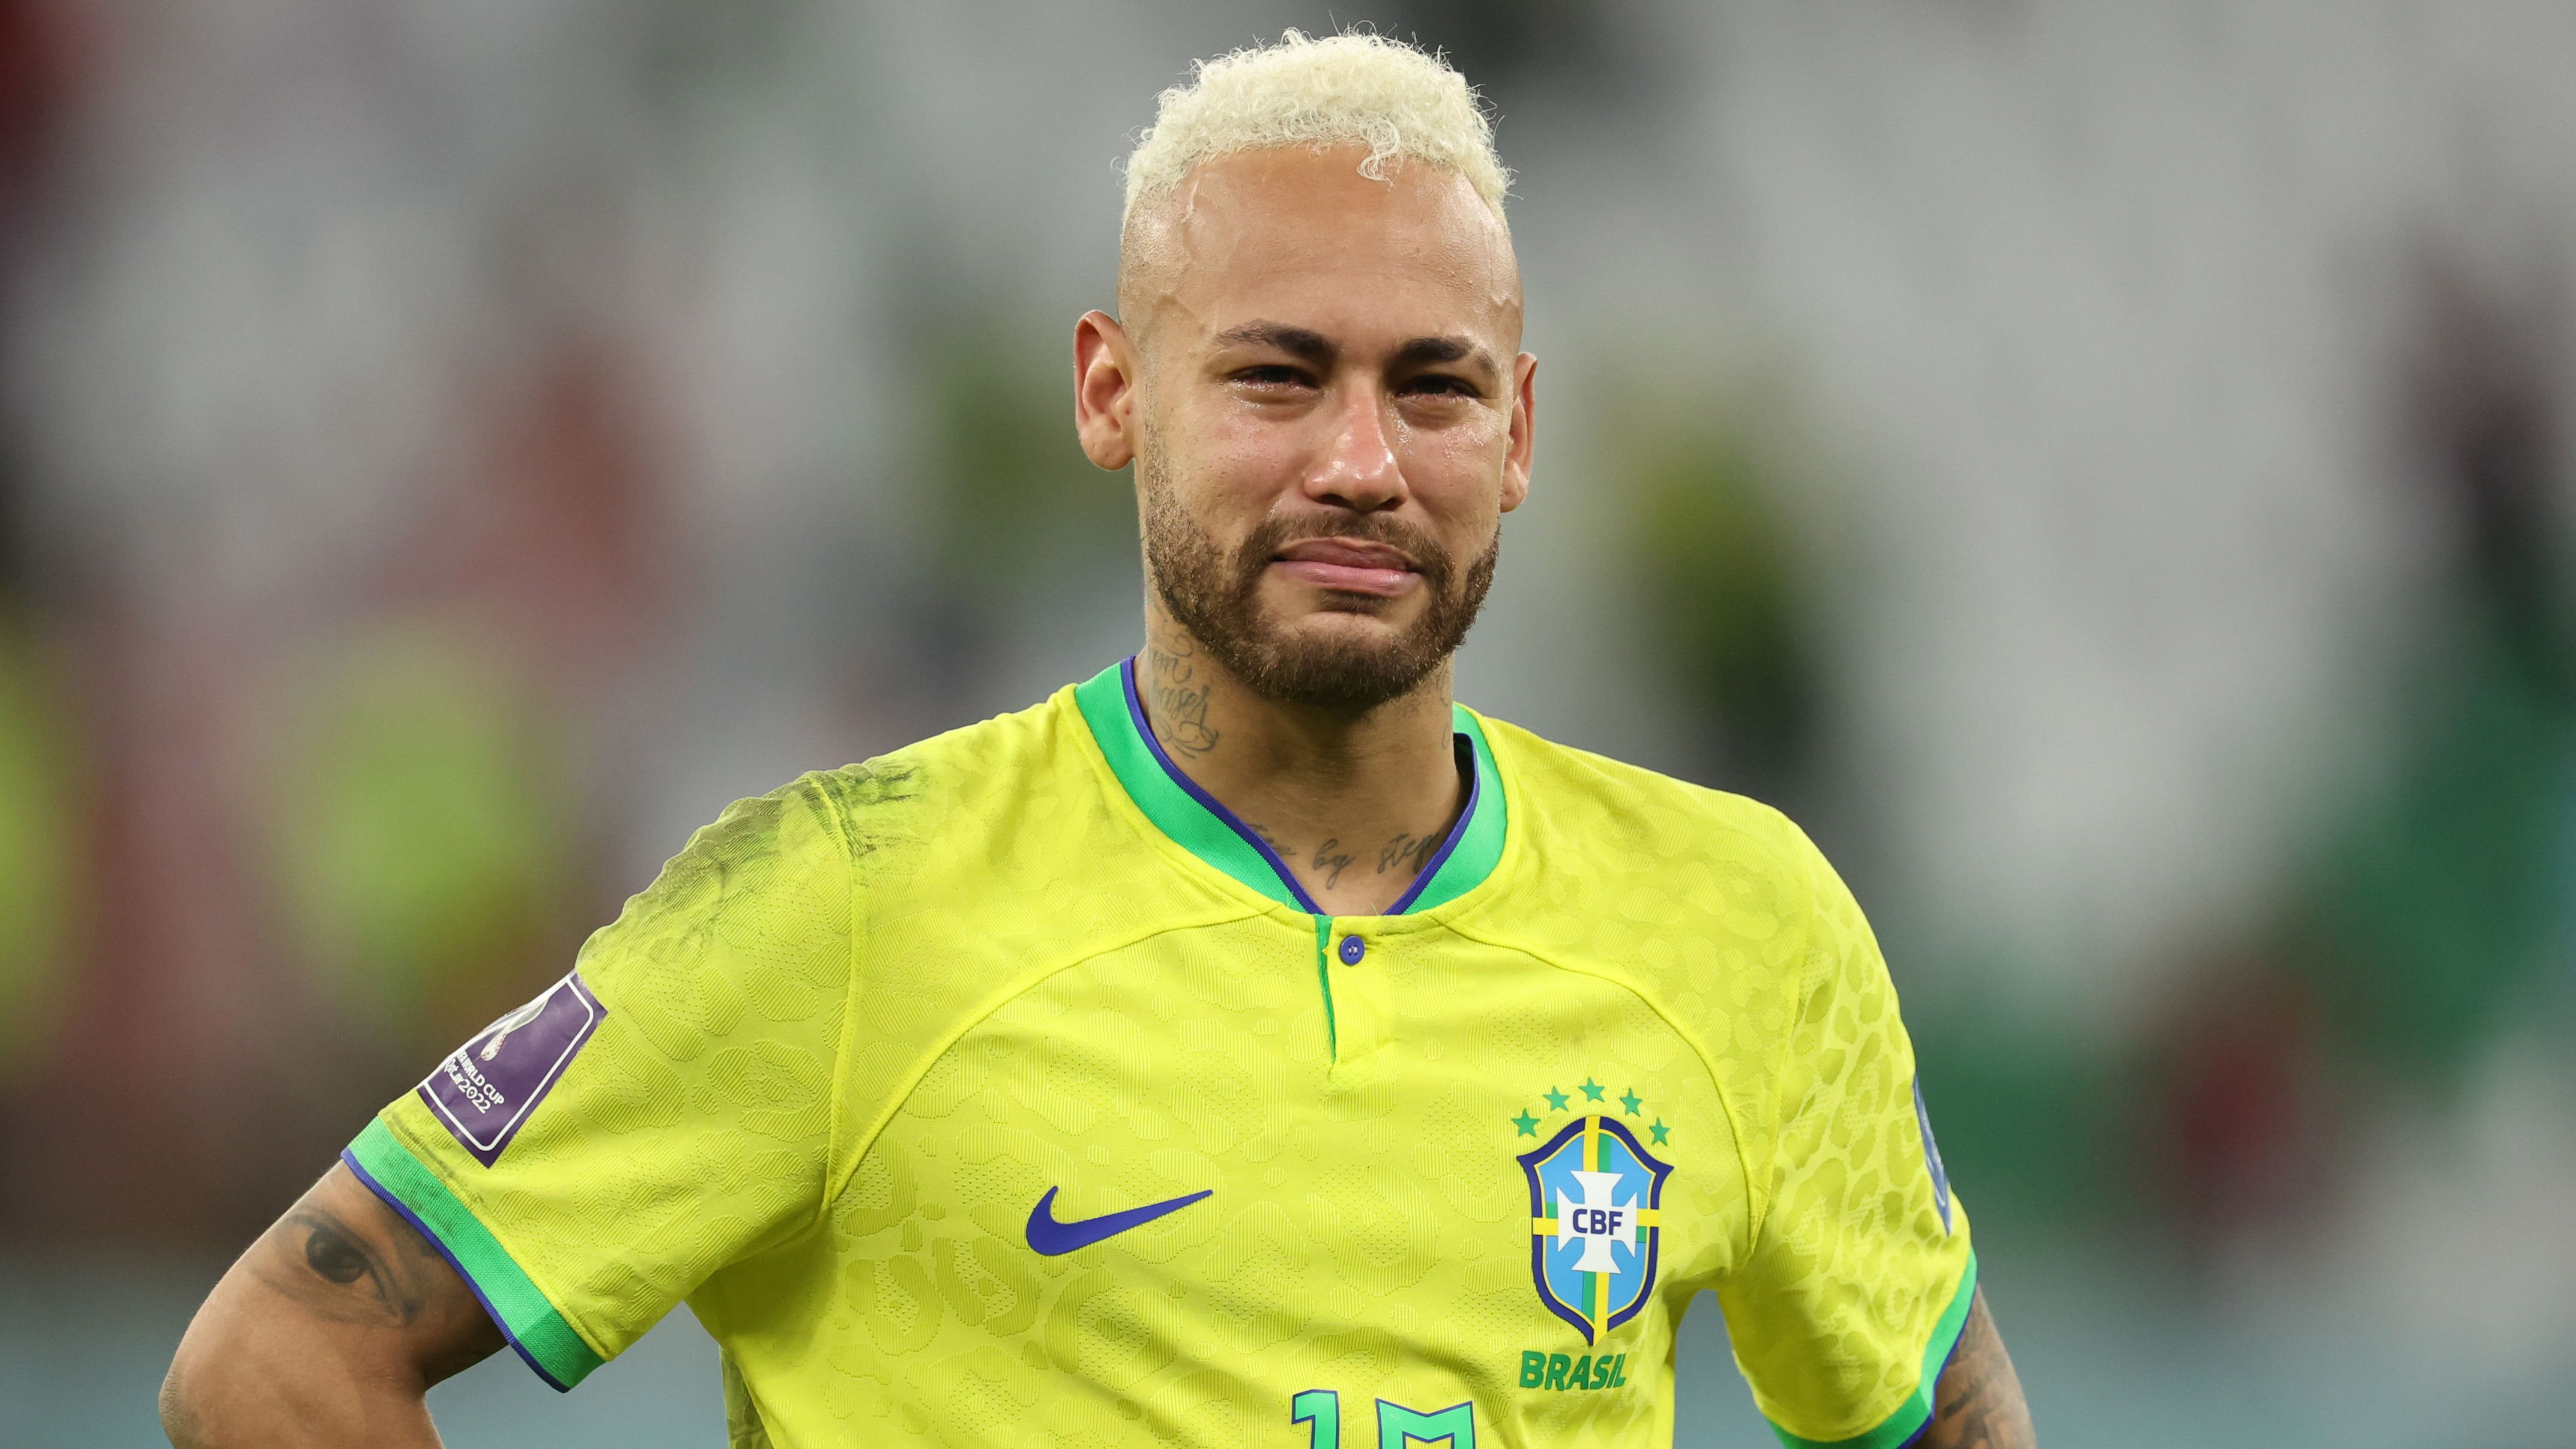 PSG wants to sell Neymar in summer to relieve the payroll